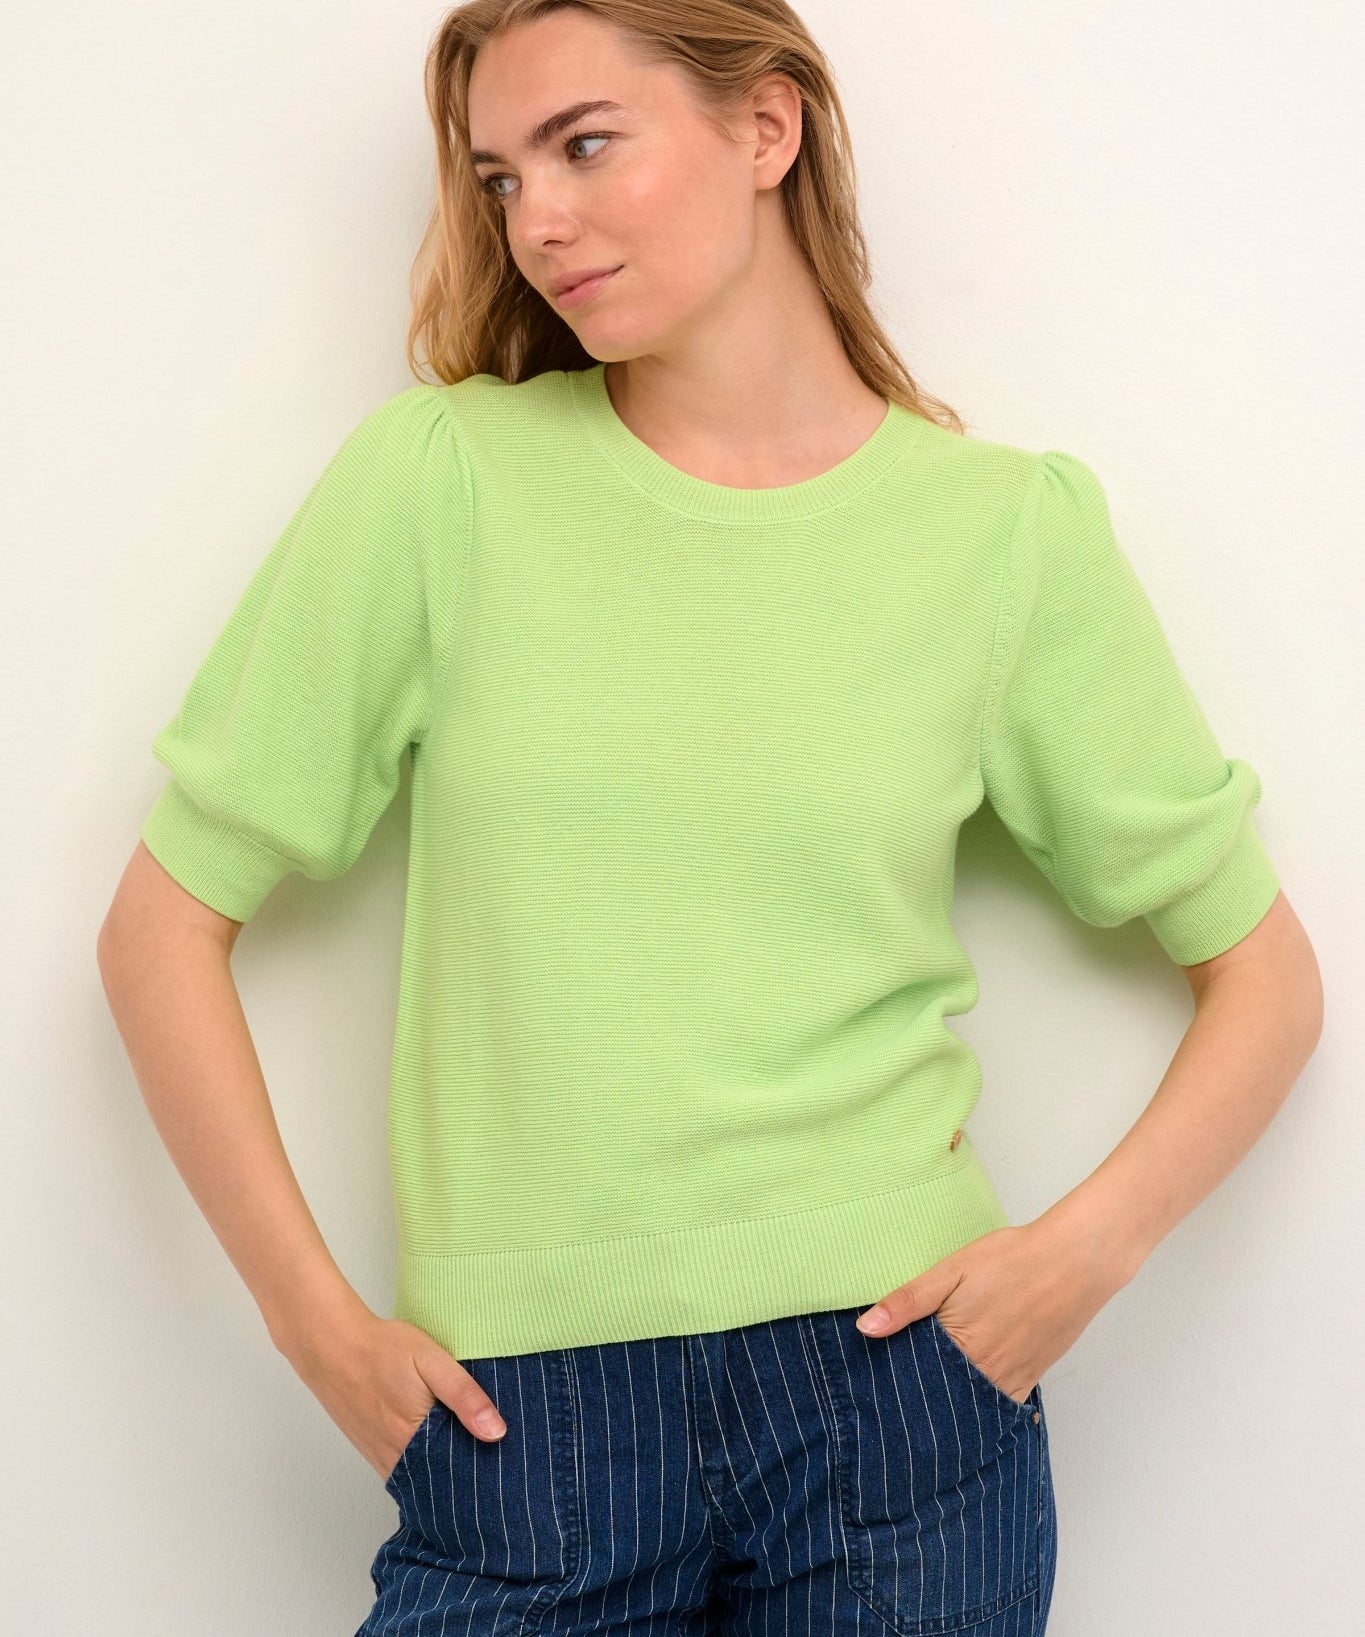 Sillar Knit Pullover by Cream - Power Green - Blue Sky Fashions & Lingerie